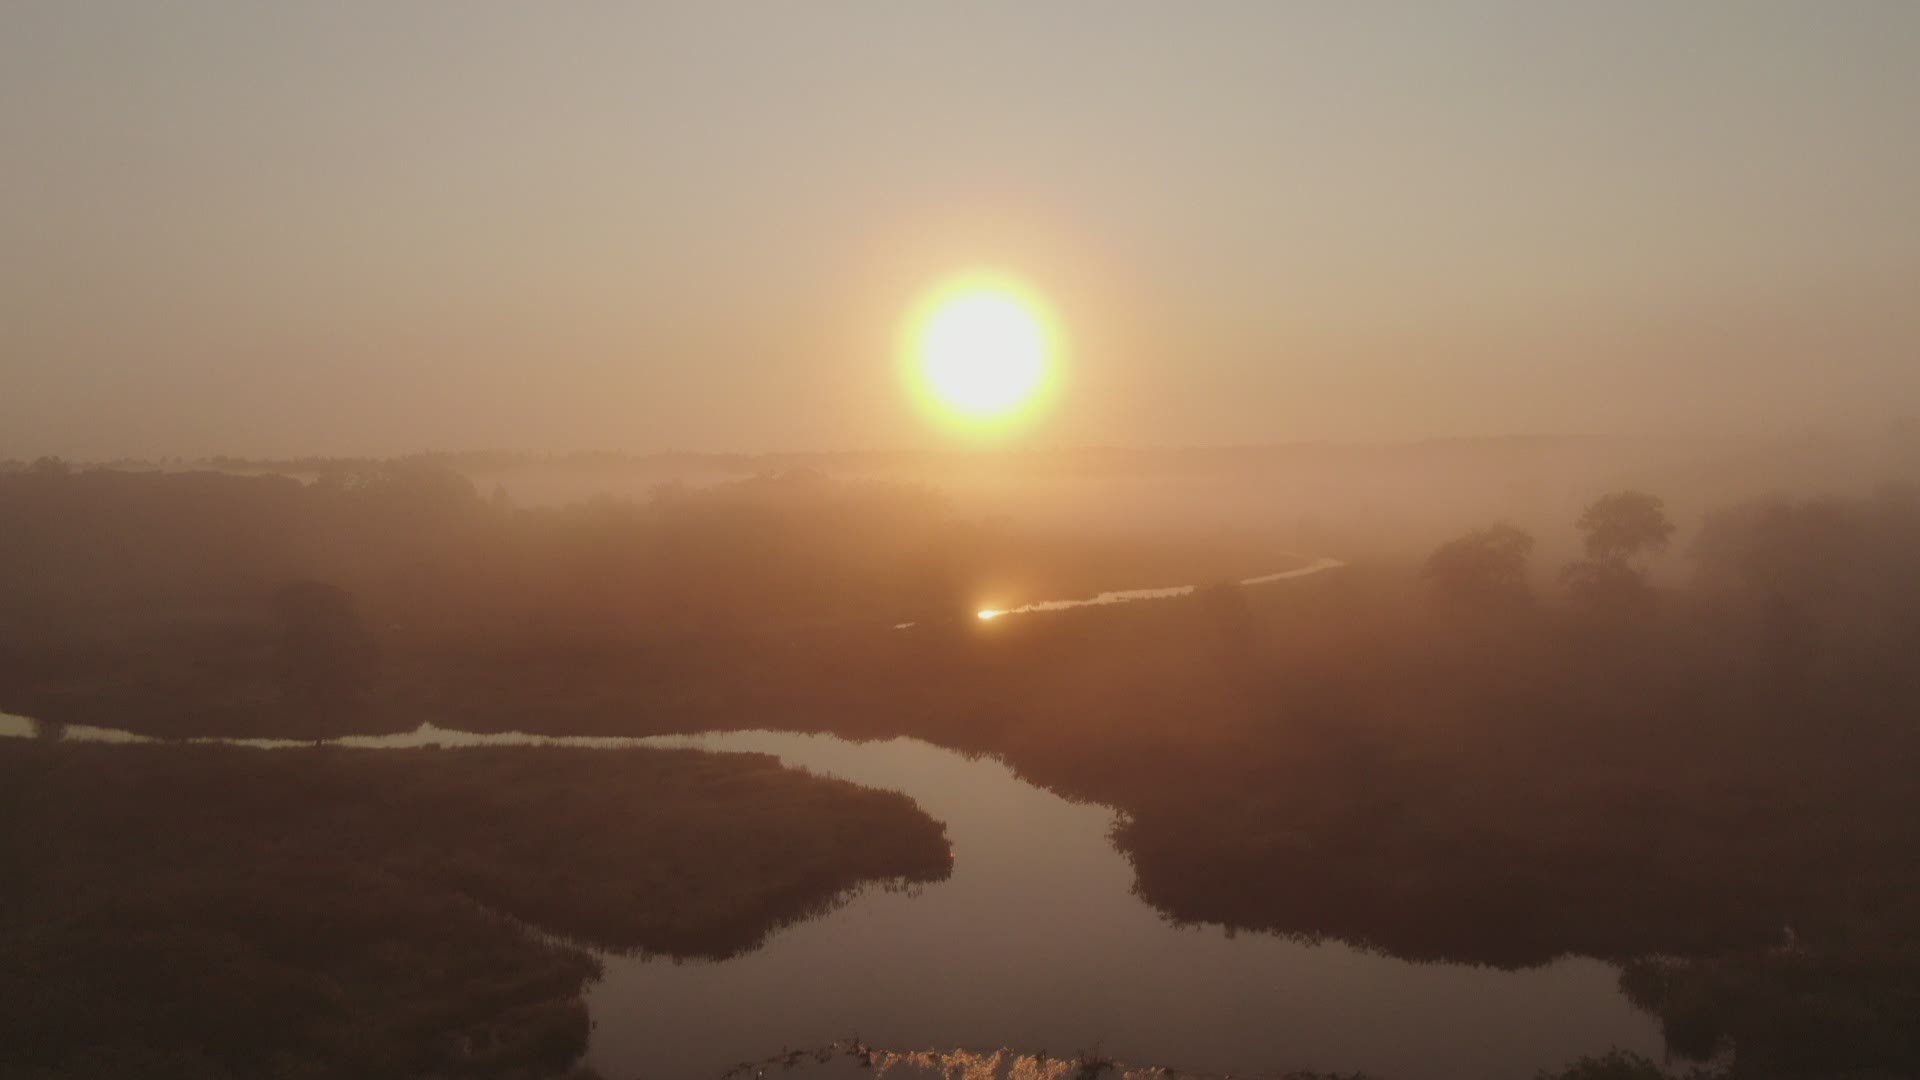 SKY61 captured the river fog this morning